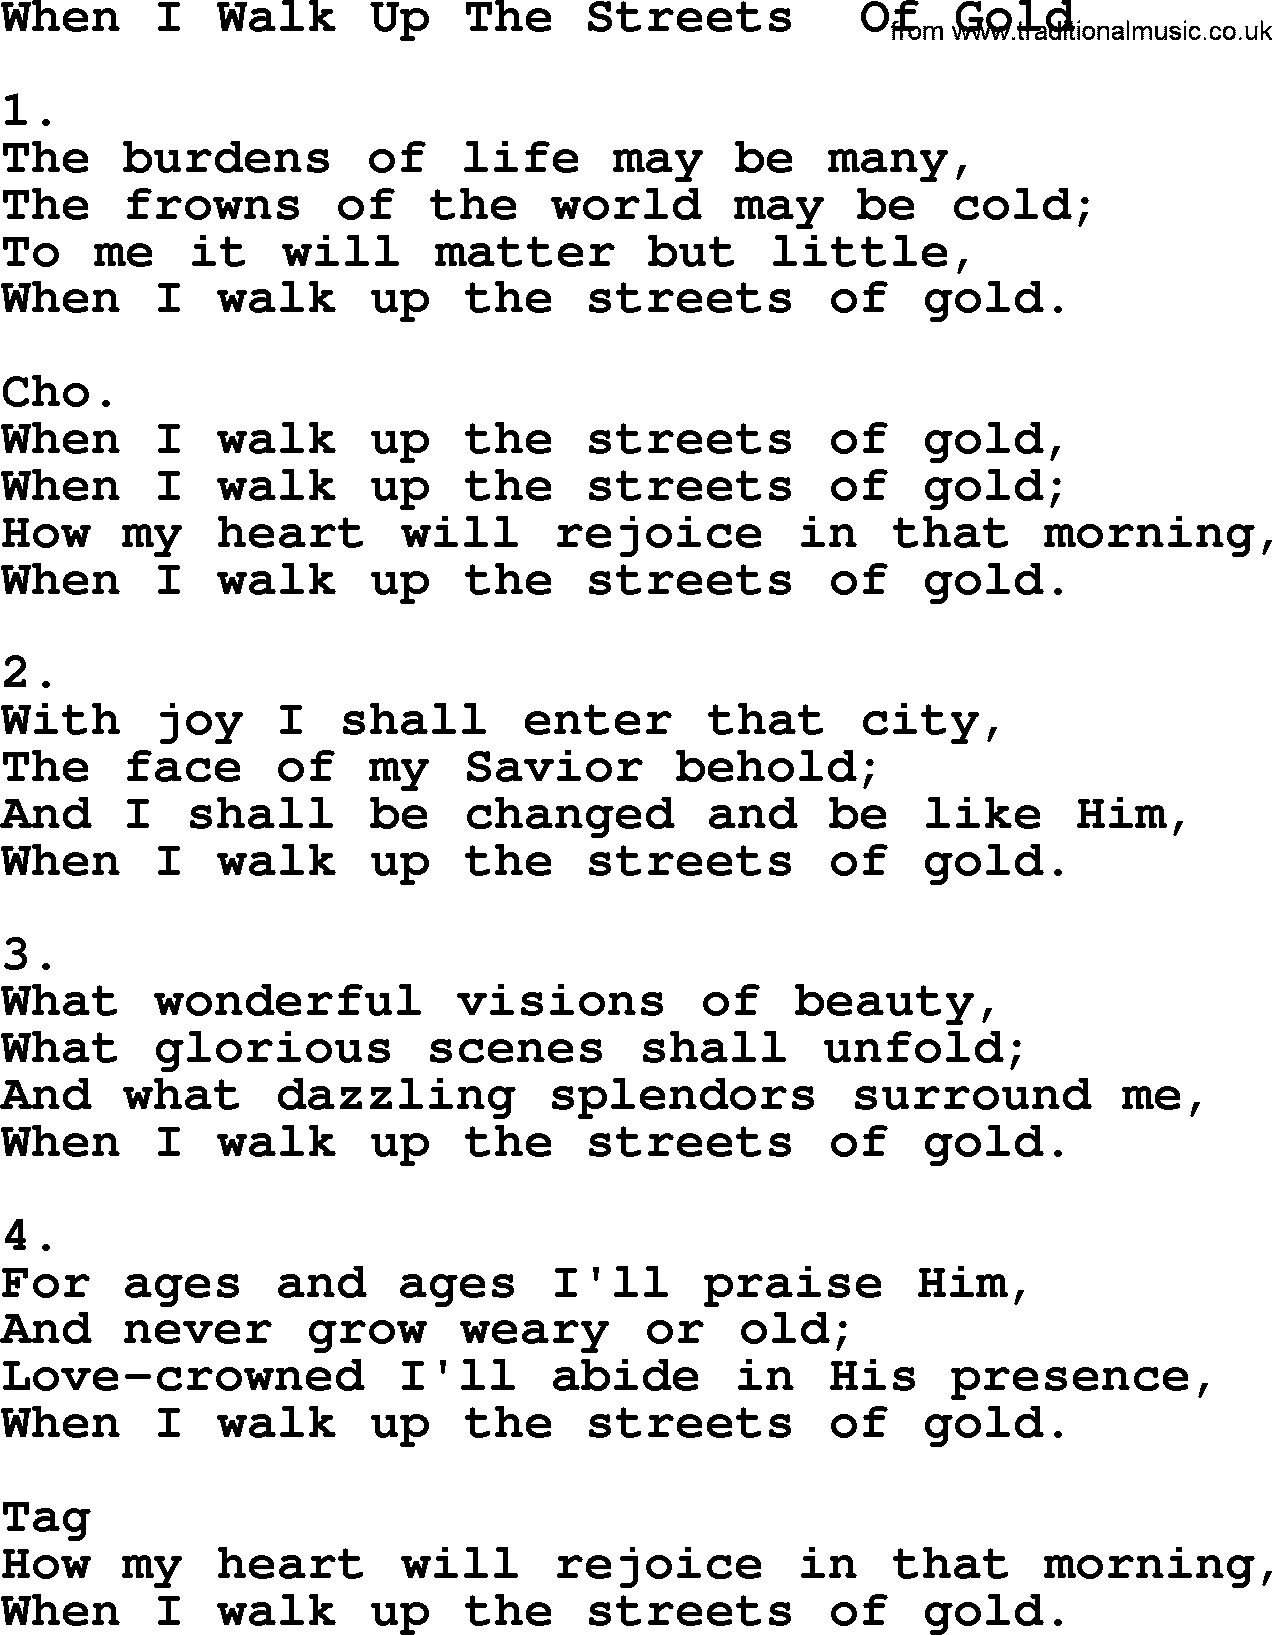 Apostolic & Pentecostal Hymns and Songs, Hymn: When I Walk Up The Streets  Of Gold lyrics and PDF